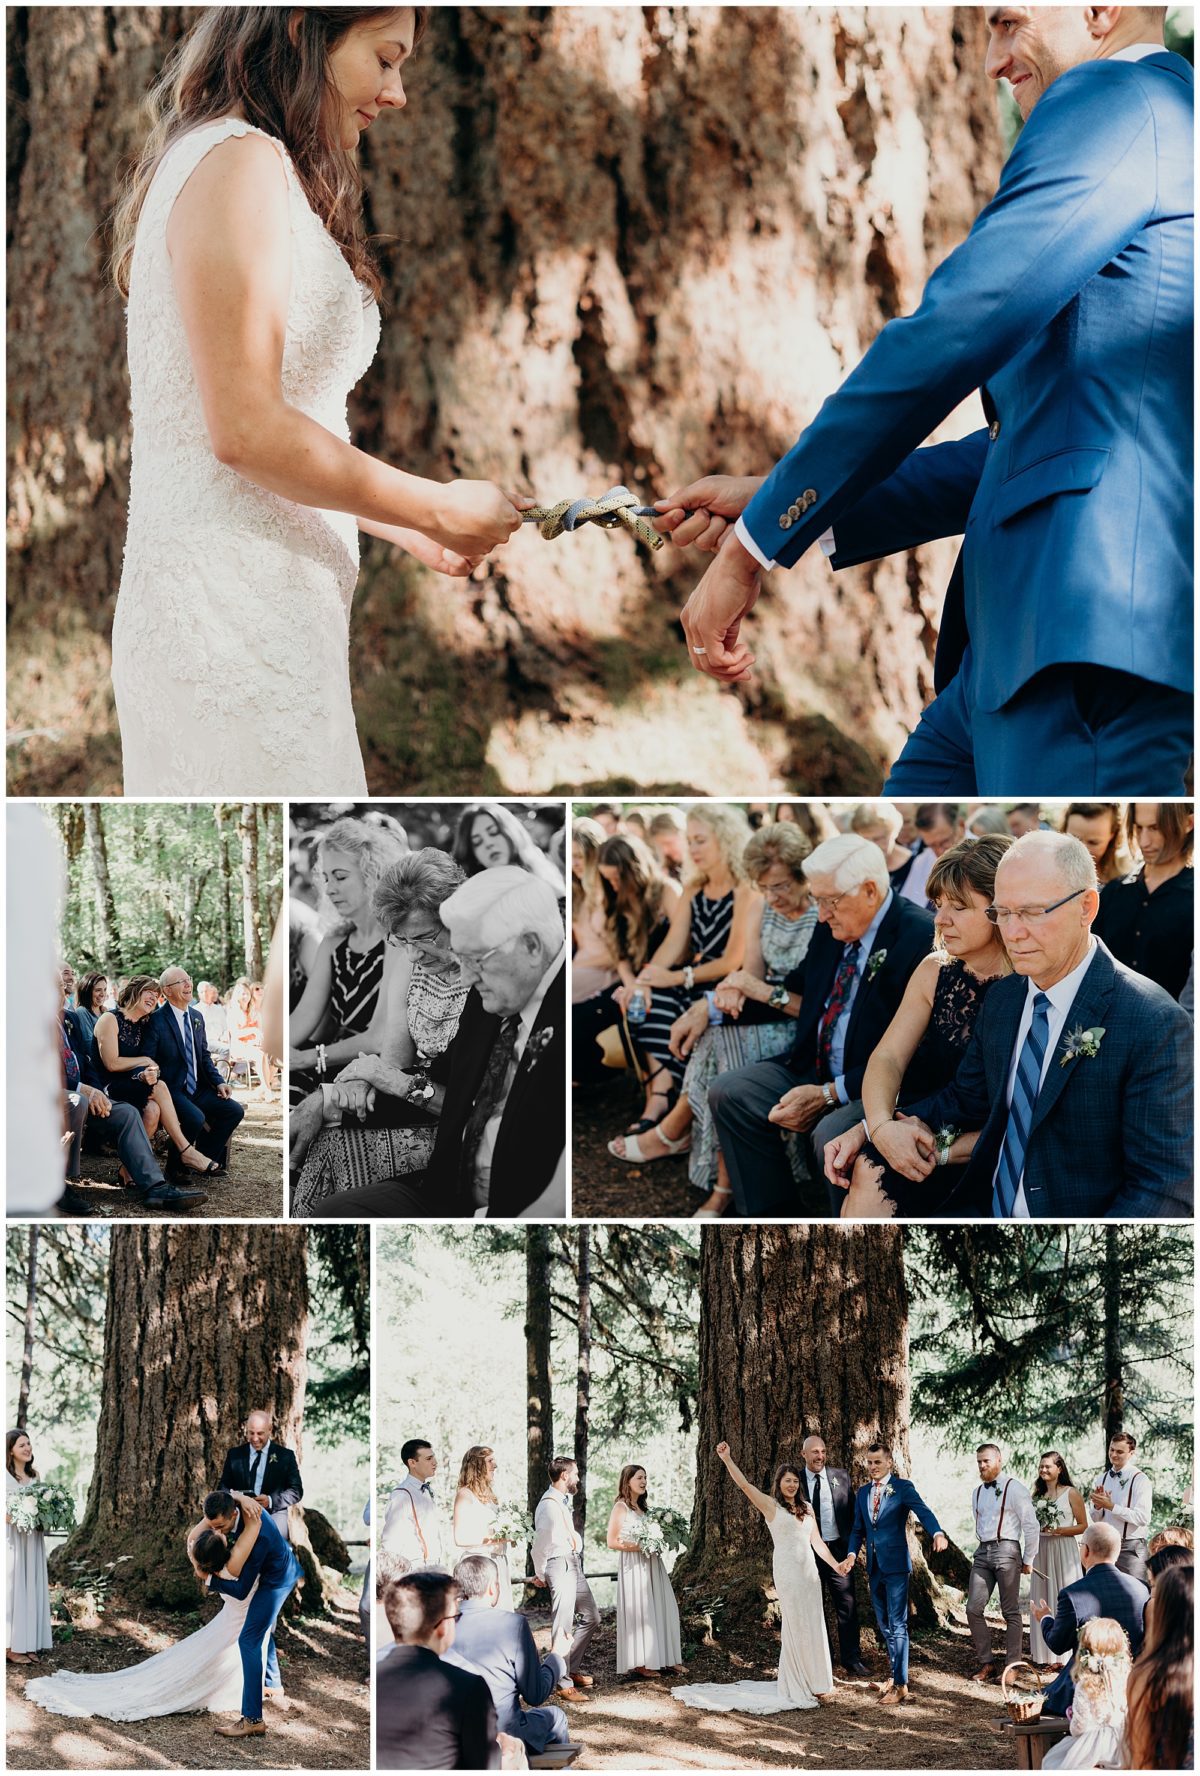 A wedding ceremony at Camp Cascade in Lyons, Oregon. Photography by PNW wedding photographer, Briana Morrison